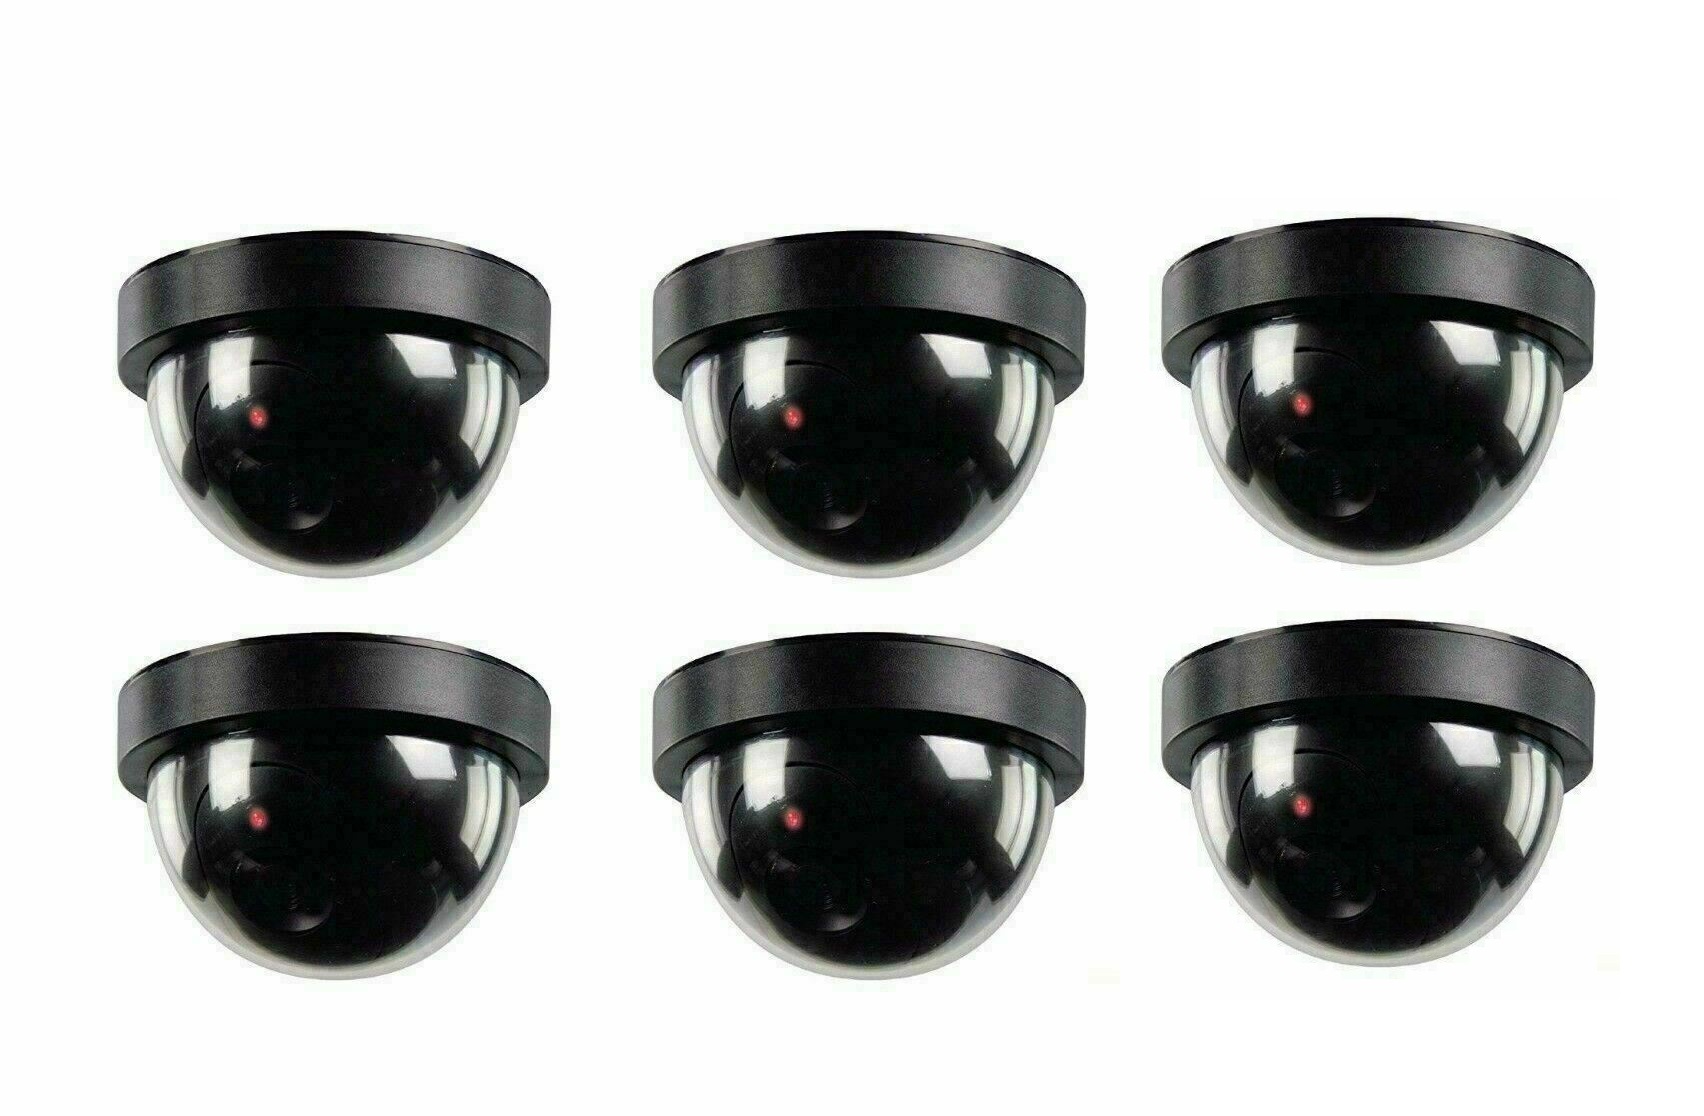 6 Pack Dummy Surveillance Camera - Dome Style